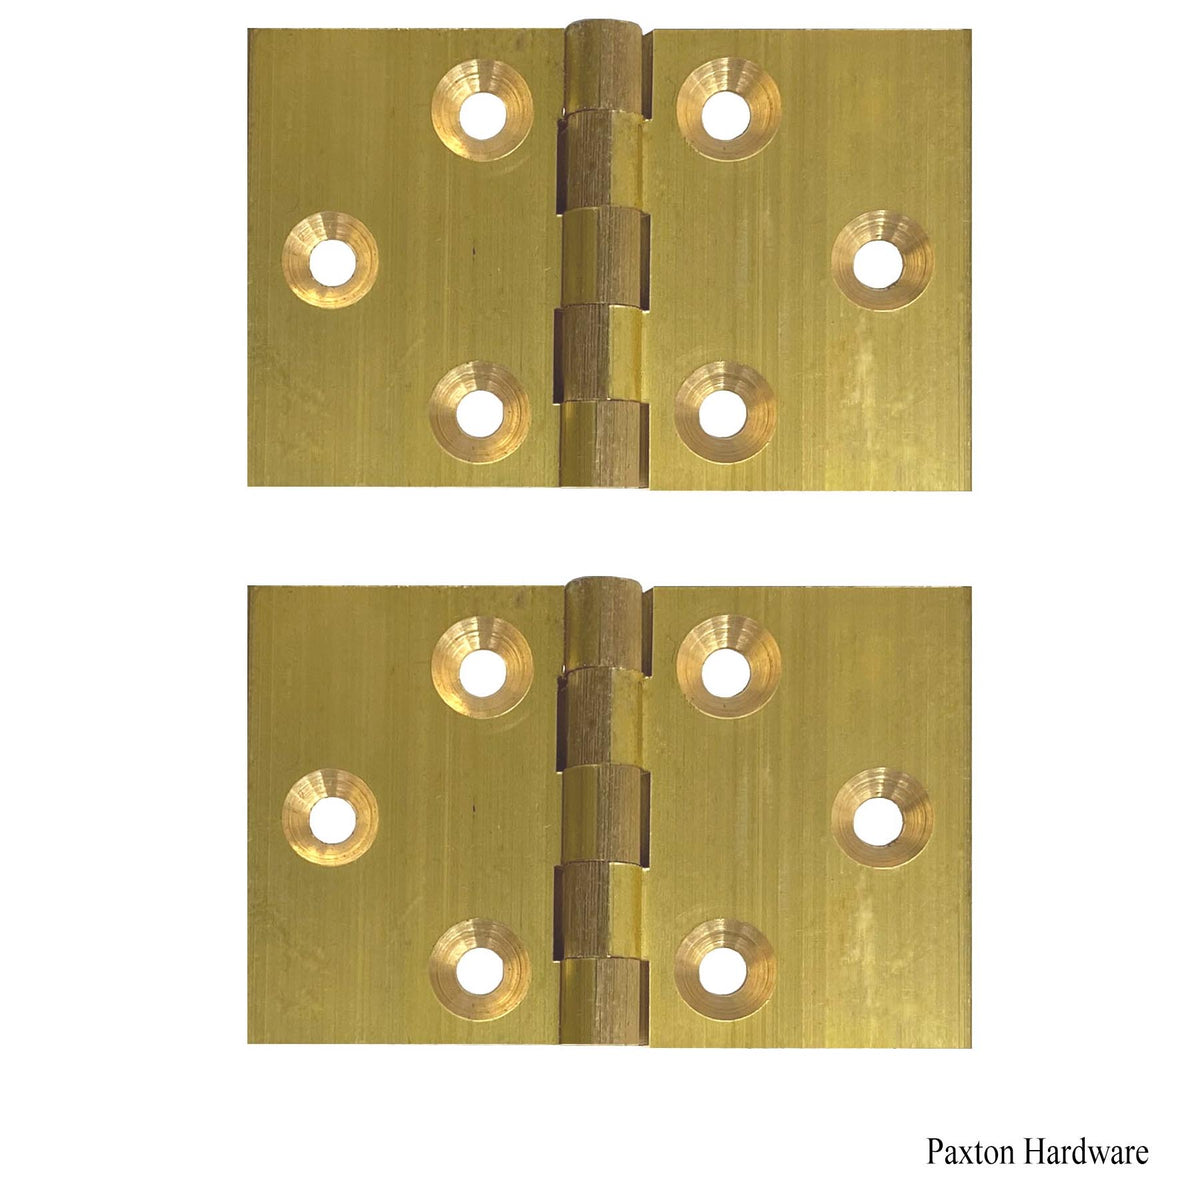 Extruded Brass Back Flap Hinges, Paxton Hardware